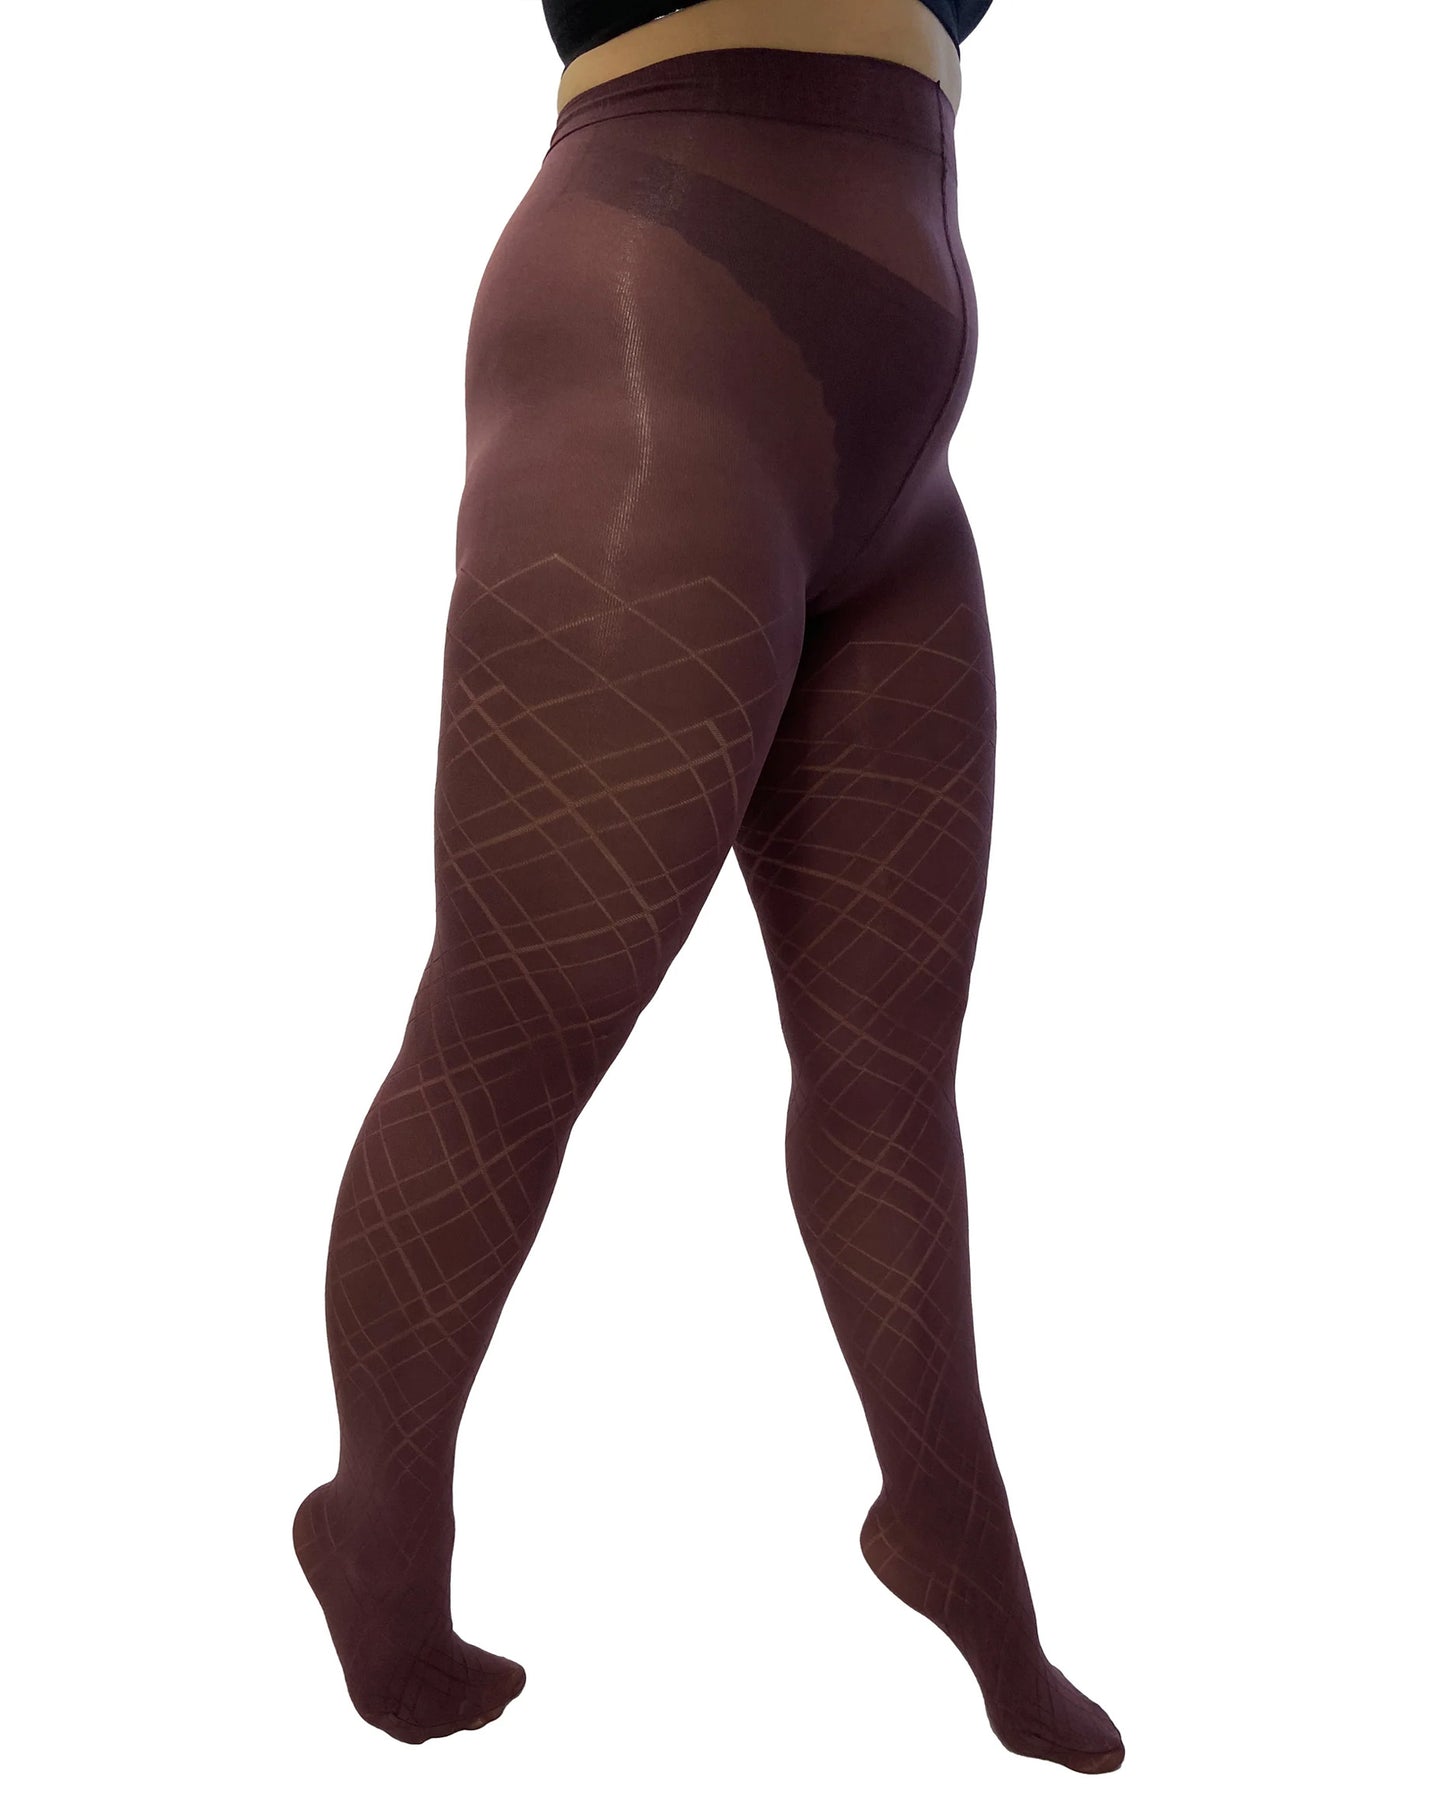 Pamela Mann Curvy Diamond Tights - Wine opaque plus size fashion tights with a sheer linear plaid style diamond pattern